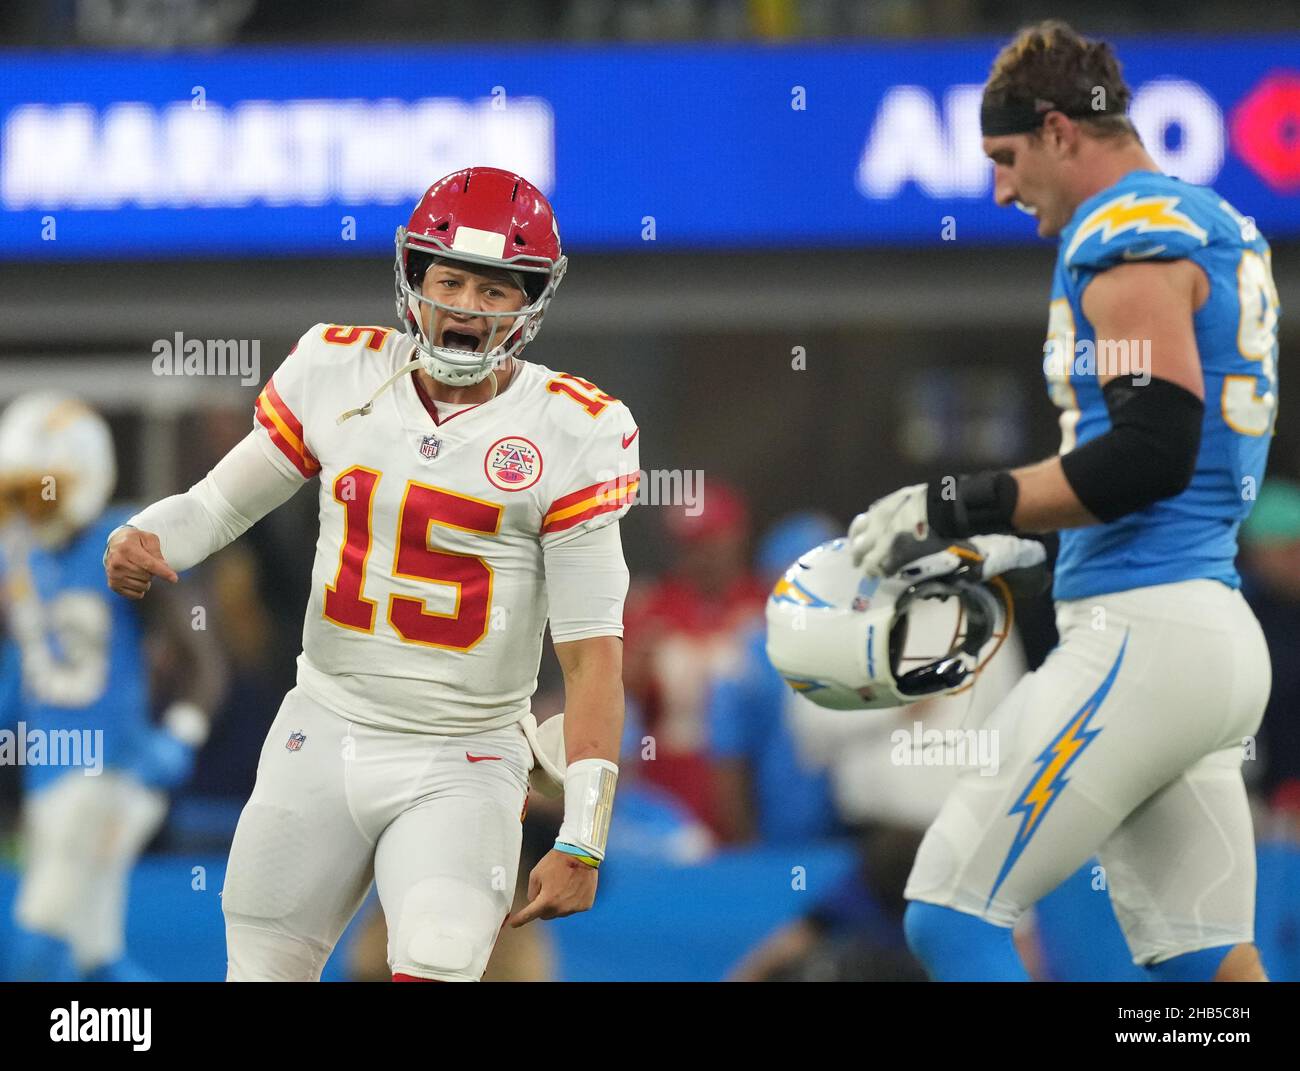 Inglewood, USA. 17th Dec, 2021. Chiefs quarterback Patrick Mahomes screams  after beating the Chargers at SoFi Stadium on Thursday, December 16, 2021  in Inglewood, California. The Chiefs defeated the Chargers in overtime